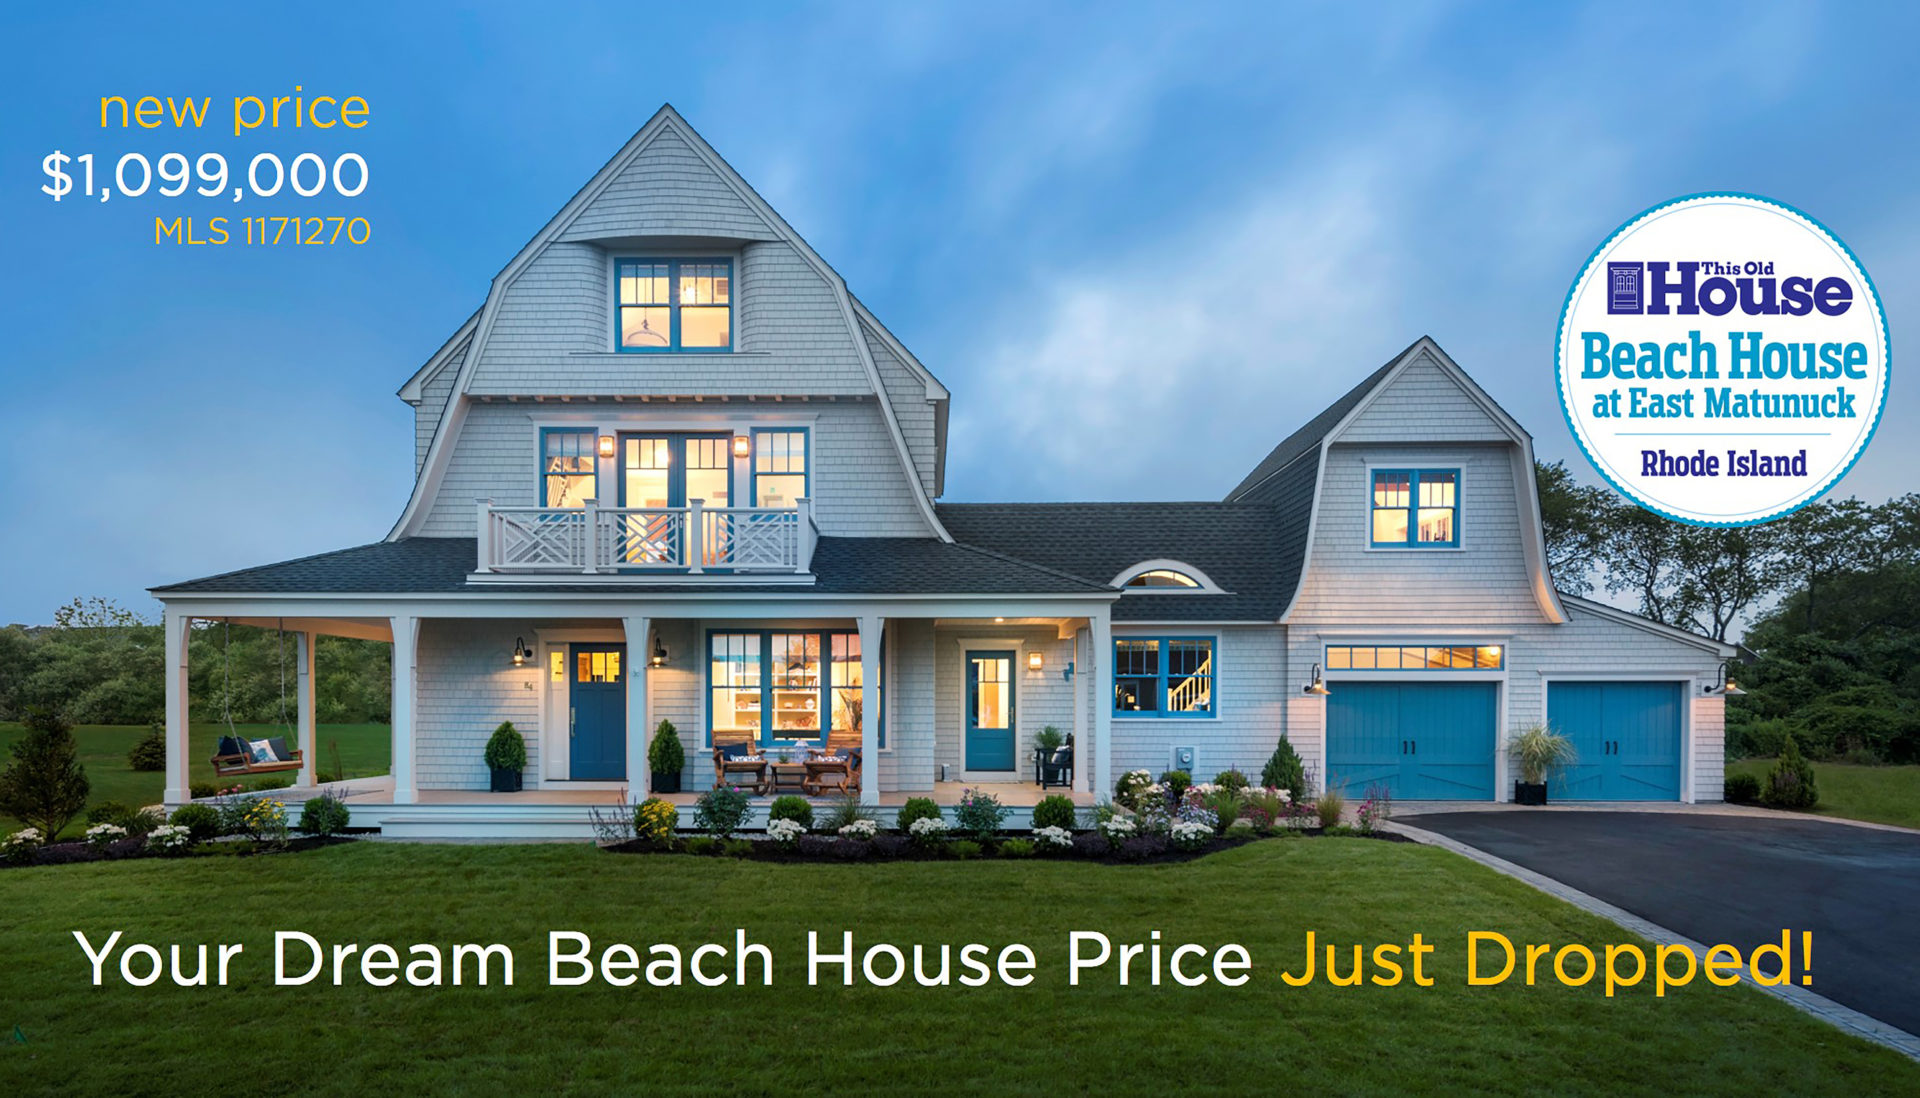 2017 This Old House 2017 Beach House is for Sale in Rhode Island!